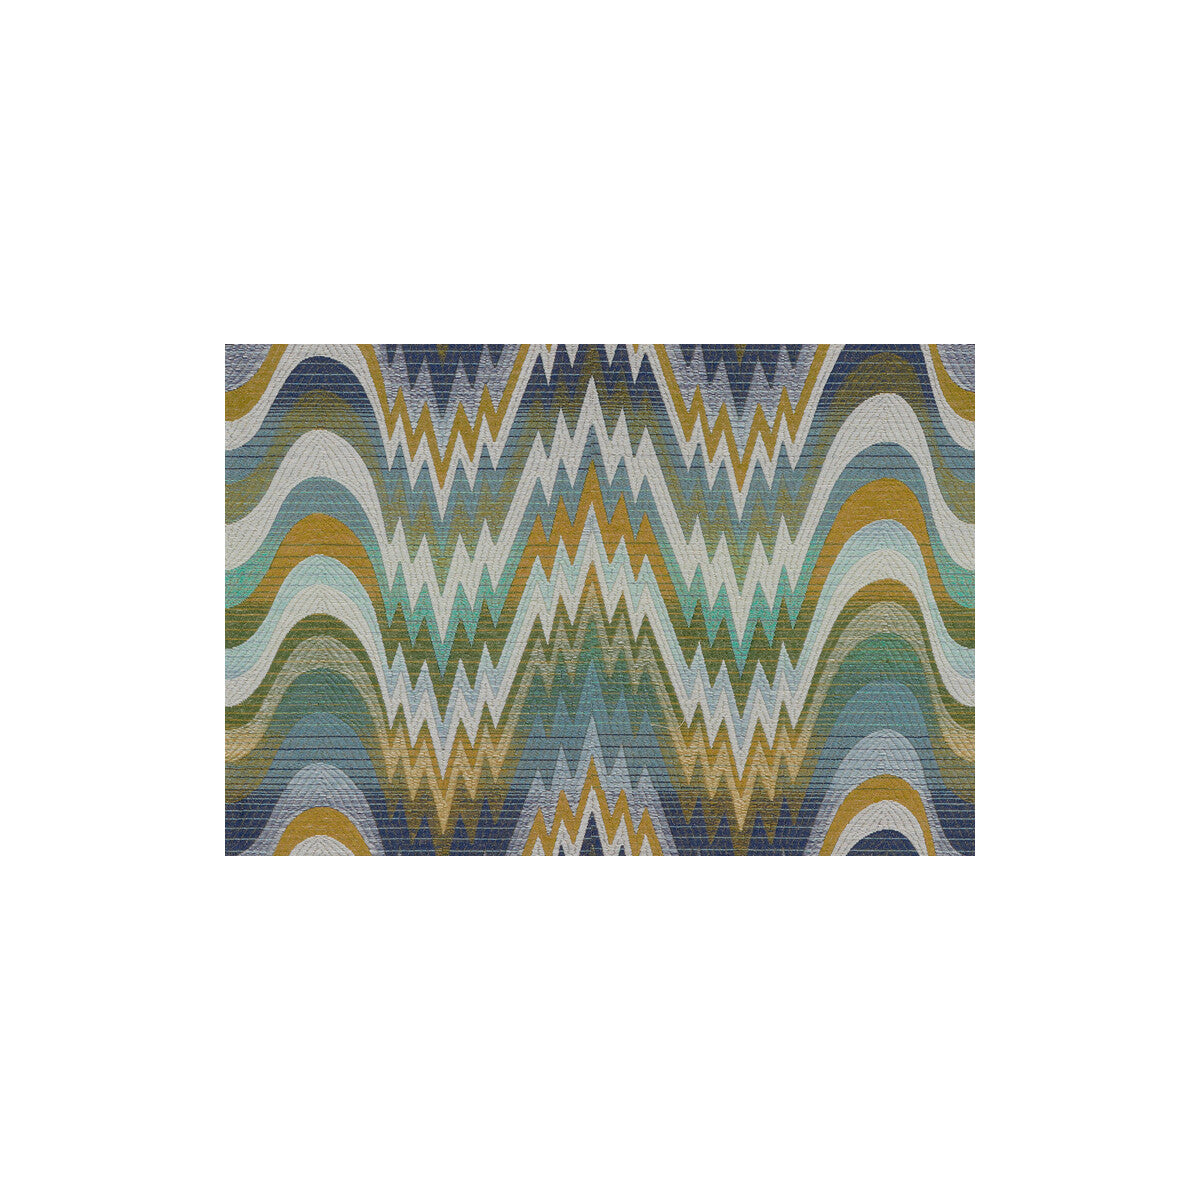 Acid Palm fabric in surf color - pattern 32503.35.0 - by Kravet Design in the Jonathan Adler Utopia collection